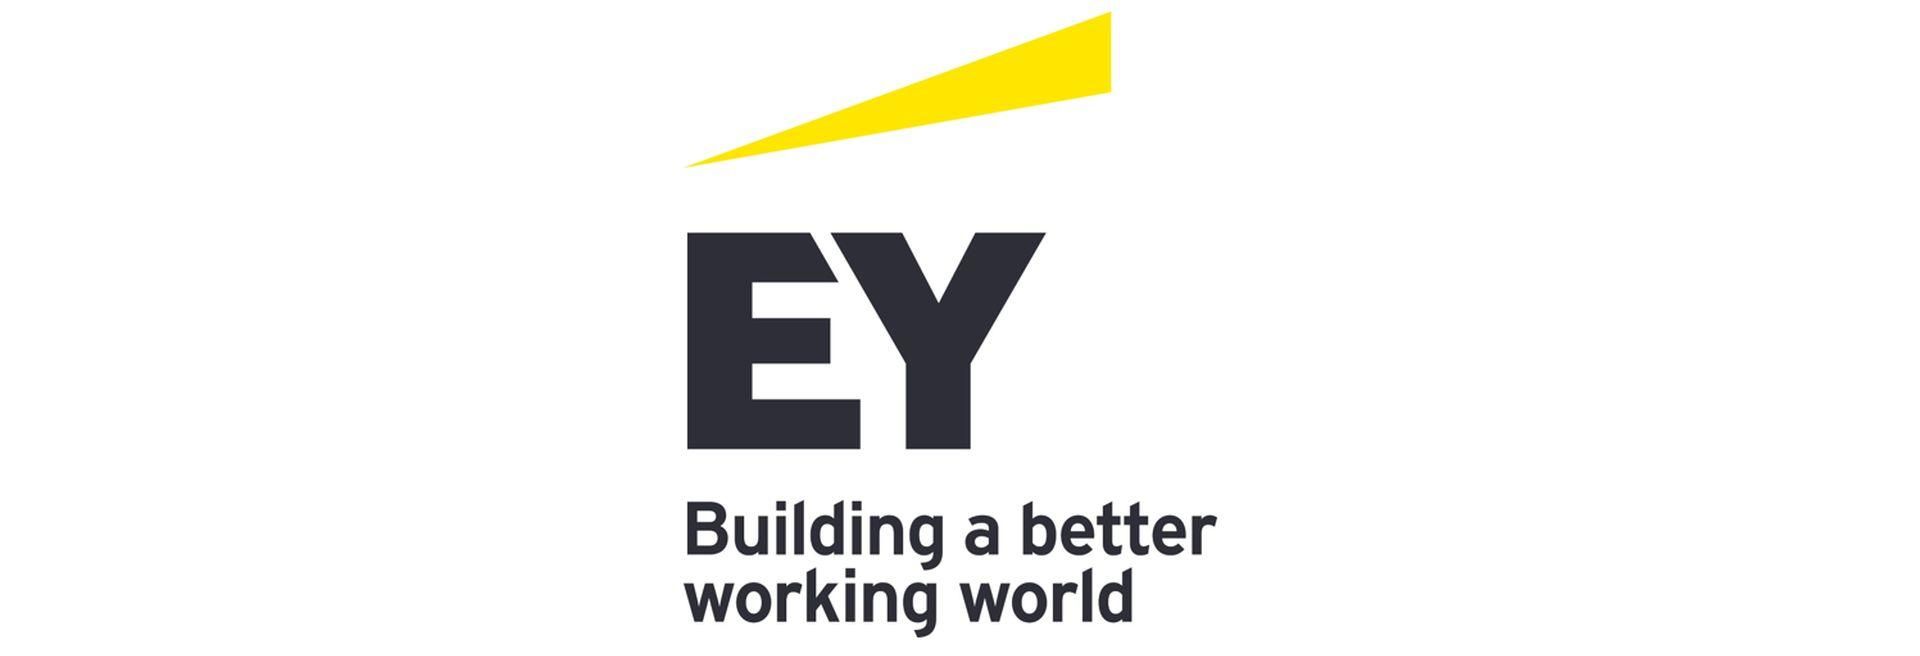 EY is to open a new Global Service Centre in Budapest - VIDEO REPORT